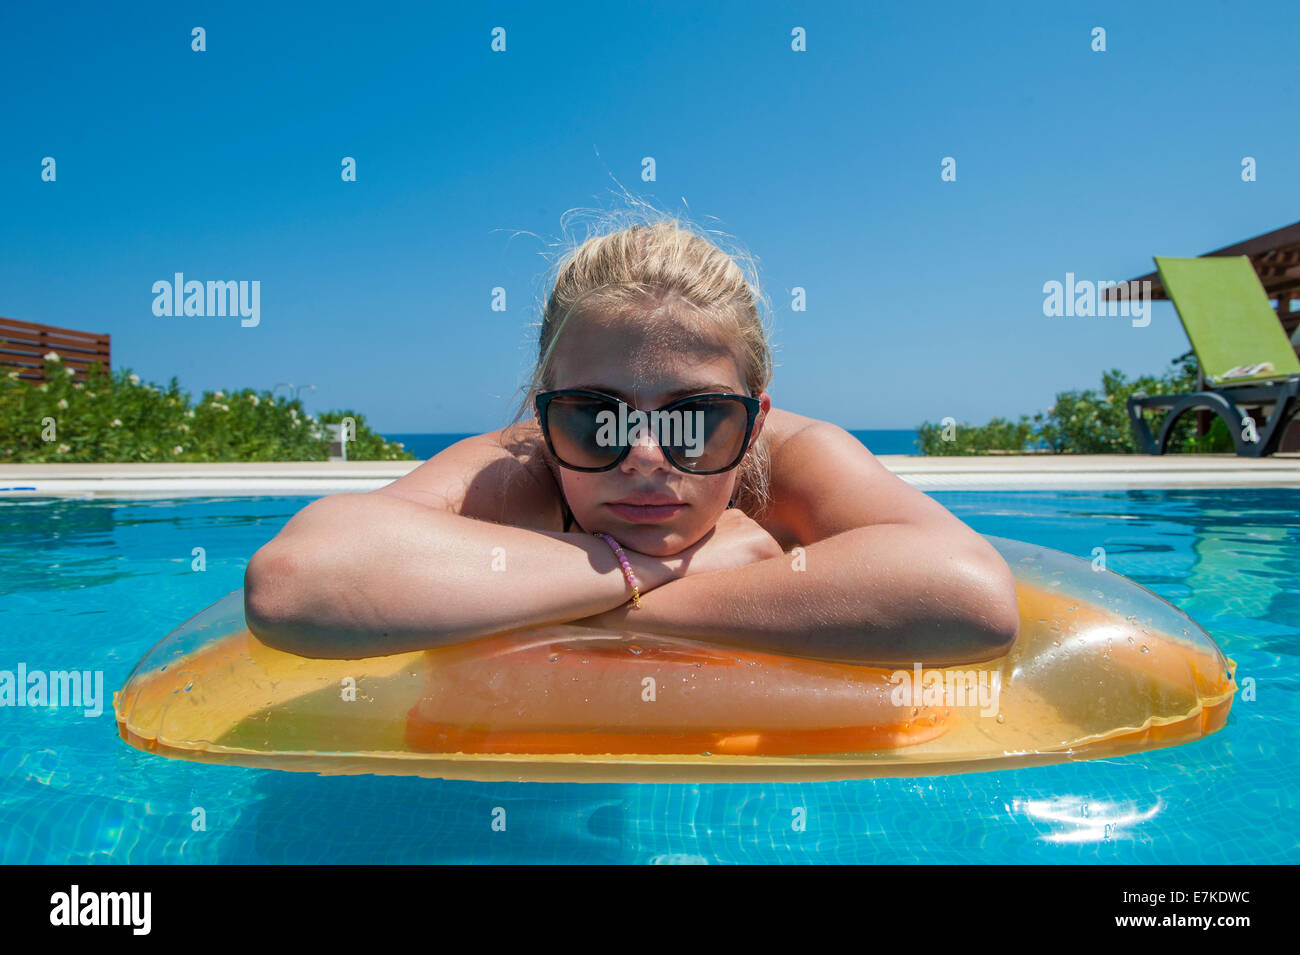 A blond girl in a pink bikini and sunglasses lies on an inflatable bed in a swimming pool in the hot sunshine Stock Photo